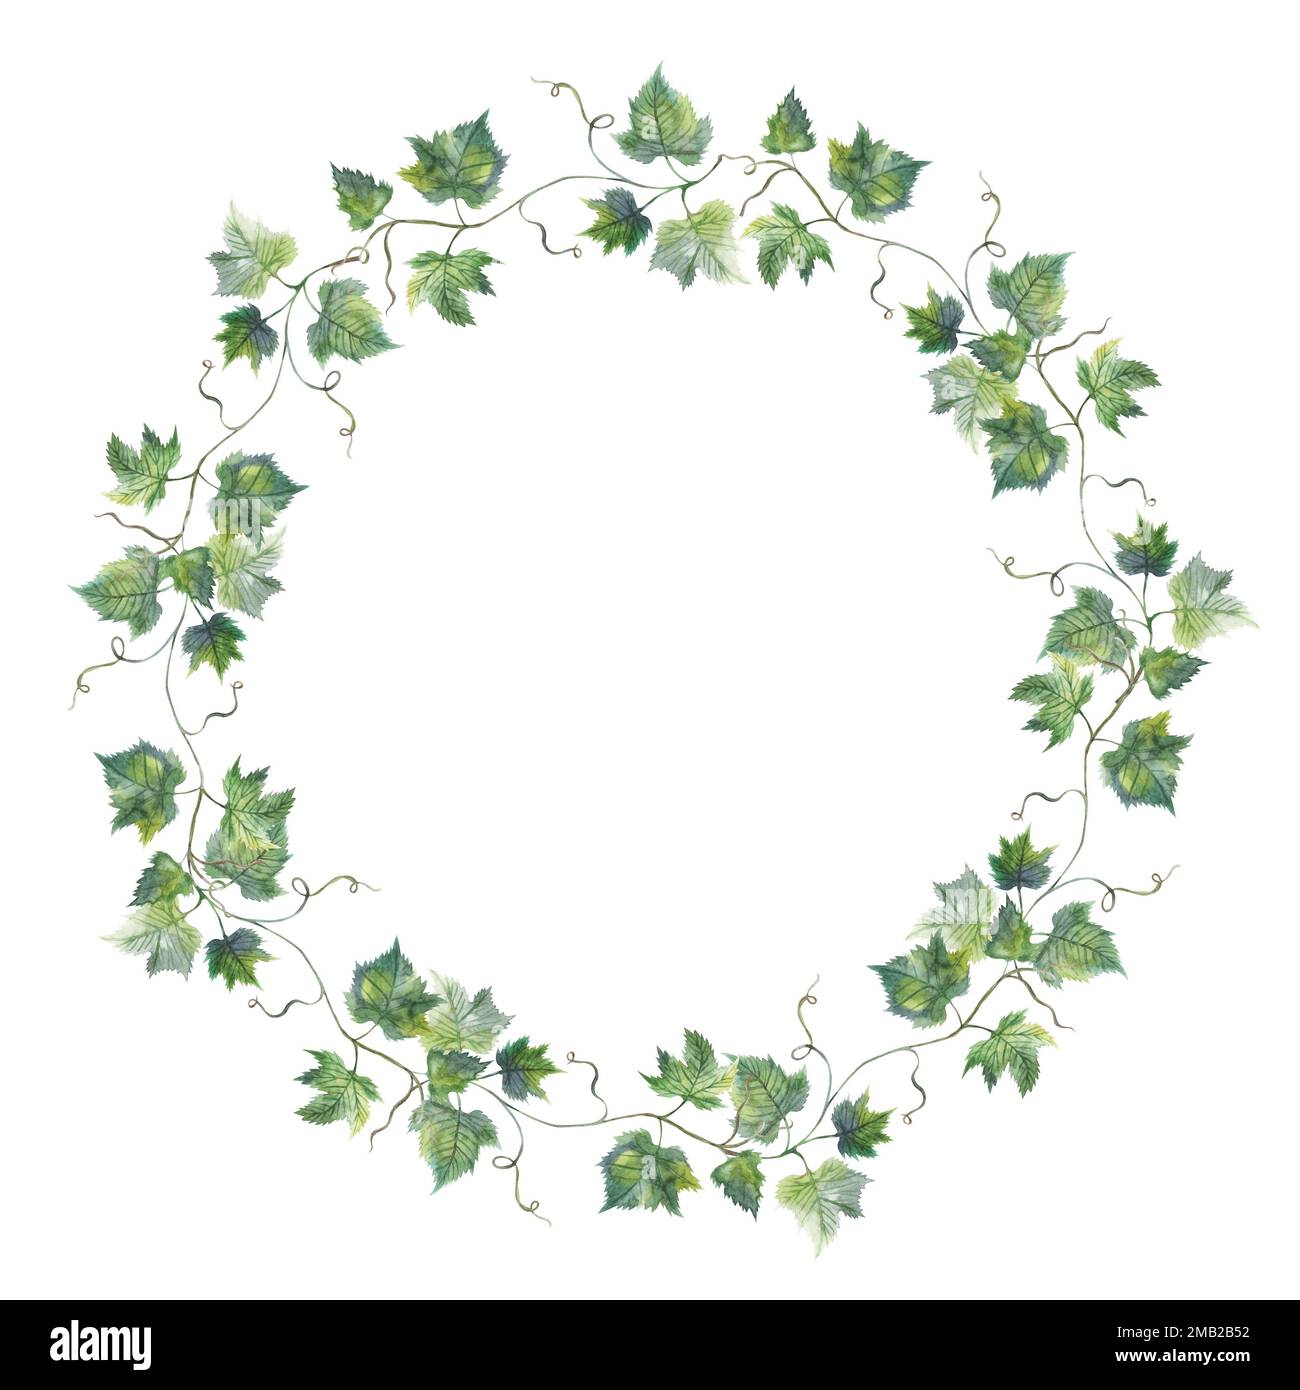 Grapevine leaf grapes wreath circle watercolor illustration hand painted Stock Photo